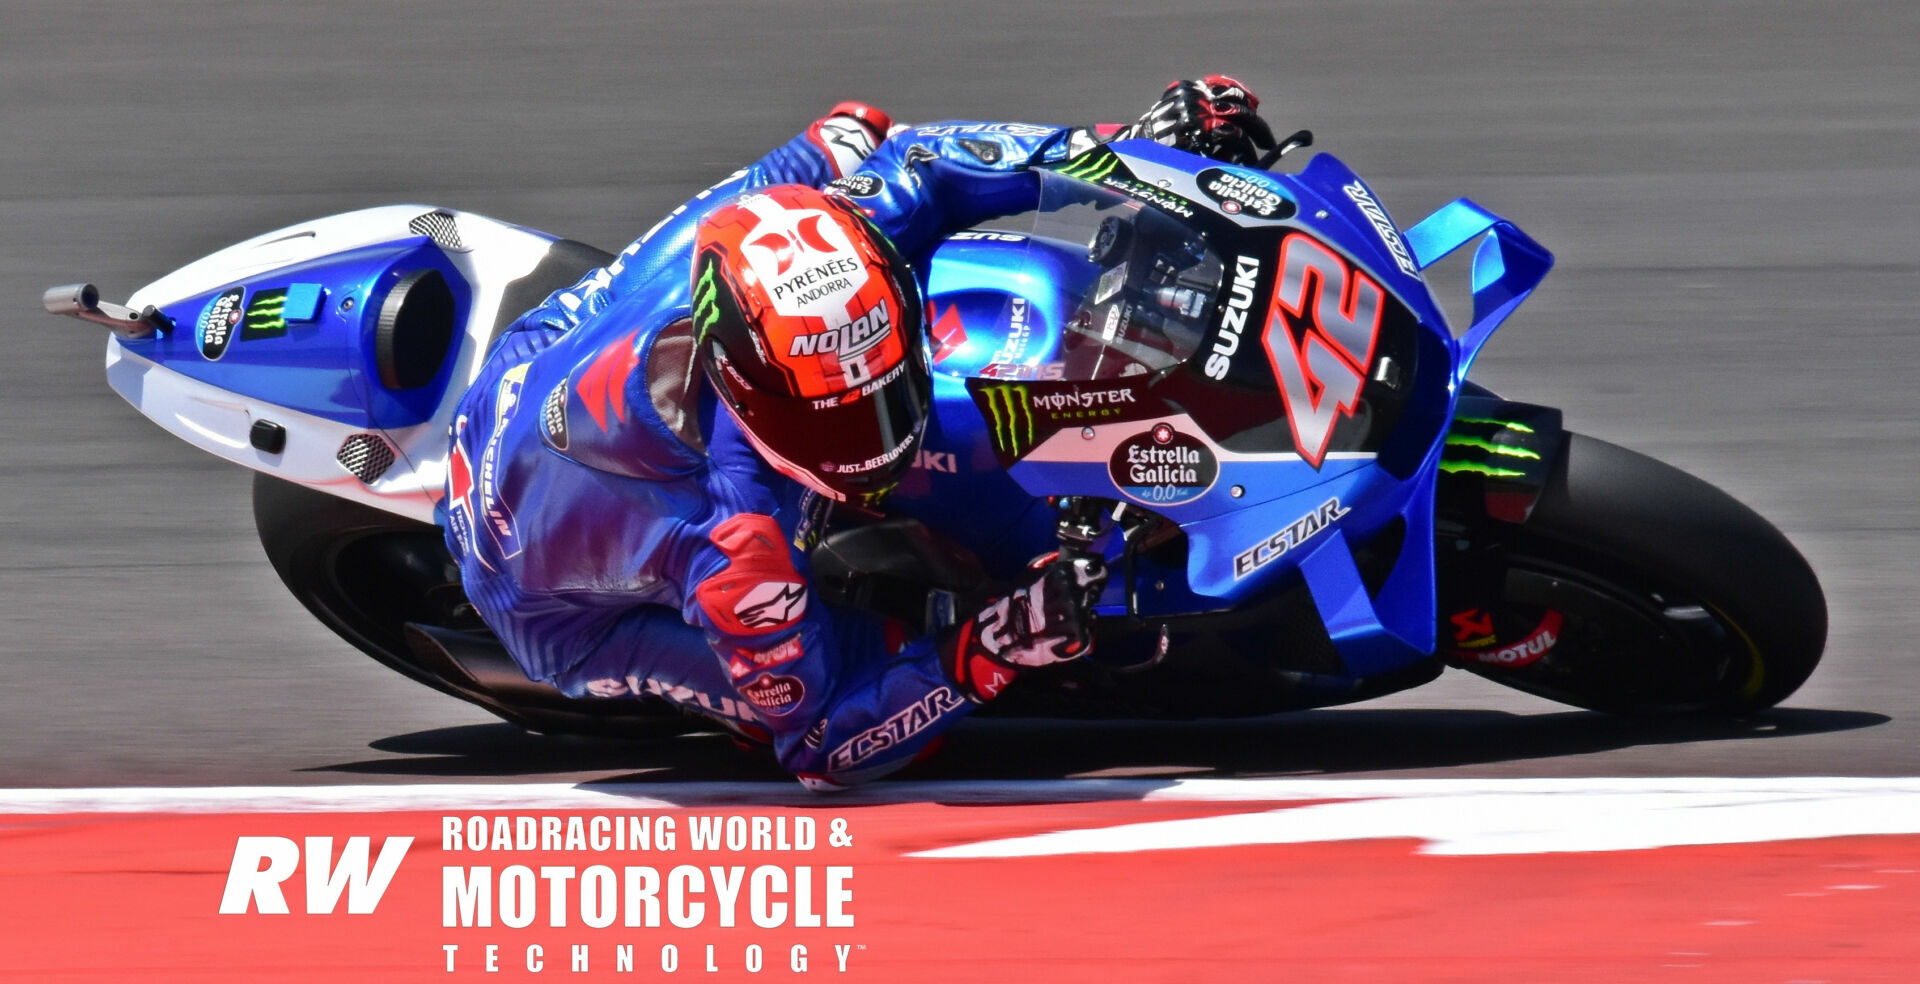 Alex Rins (42) in action at the Red Bull Grand Prix of the Americas. Photo by Michael Gougis.